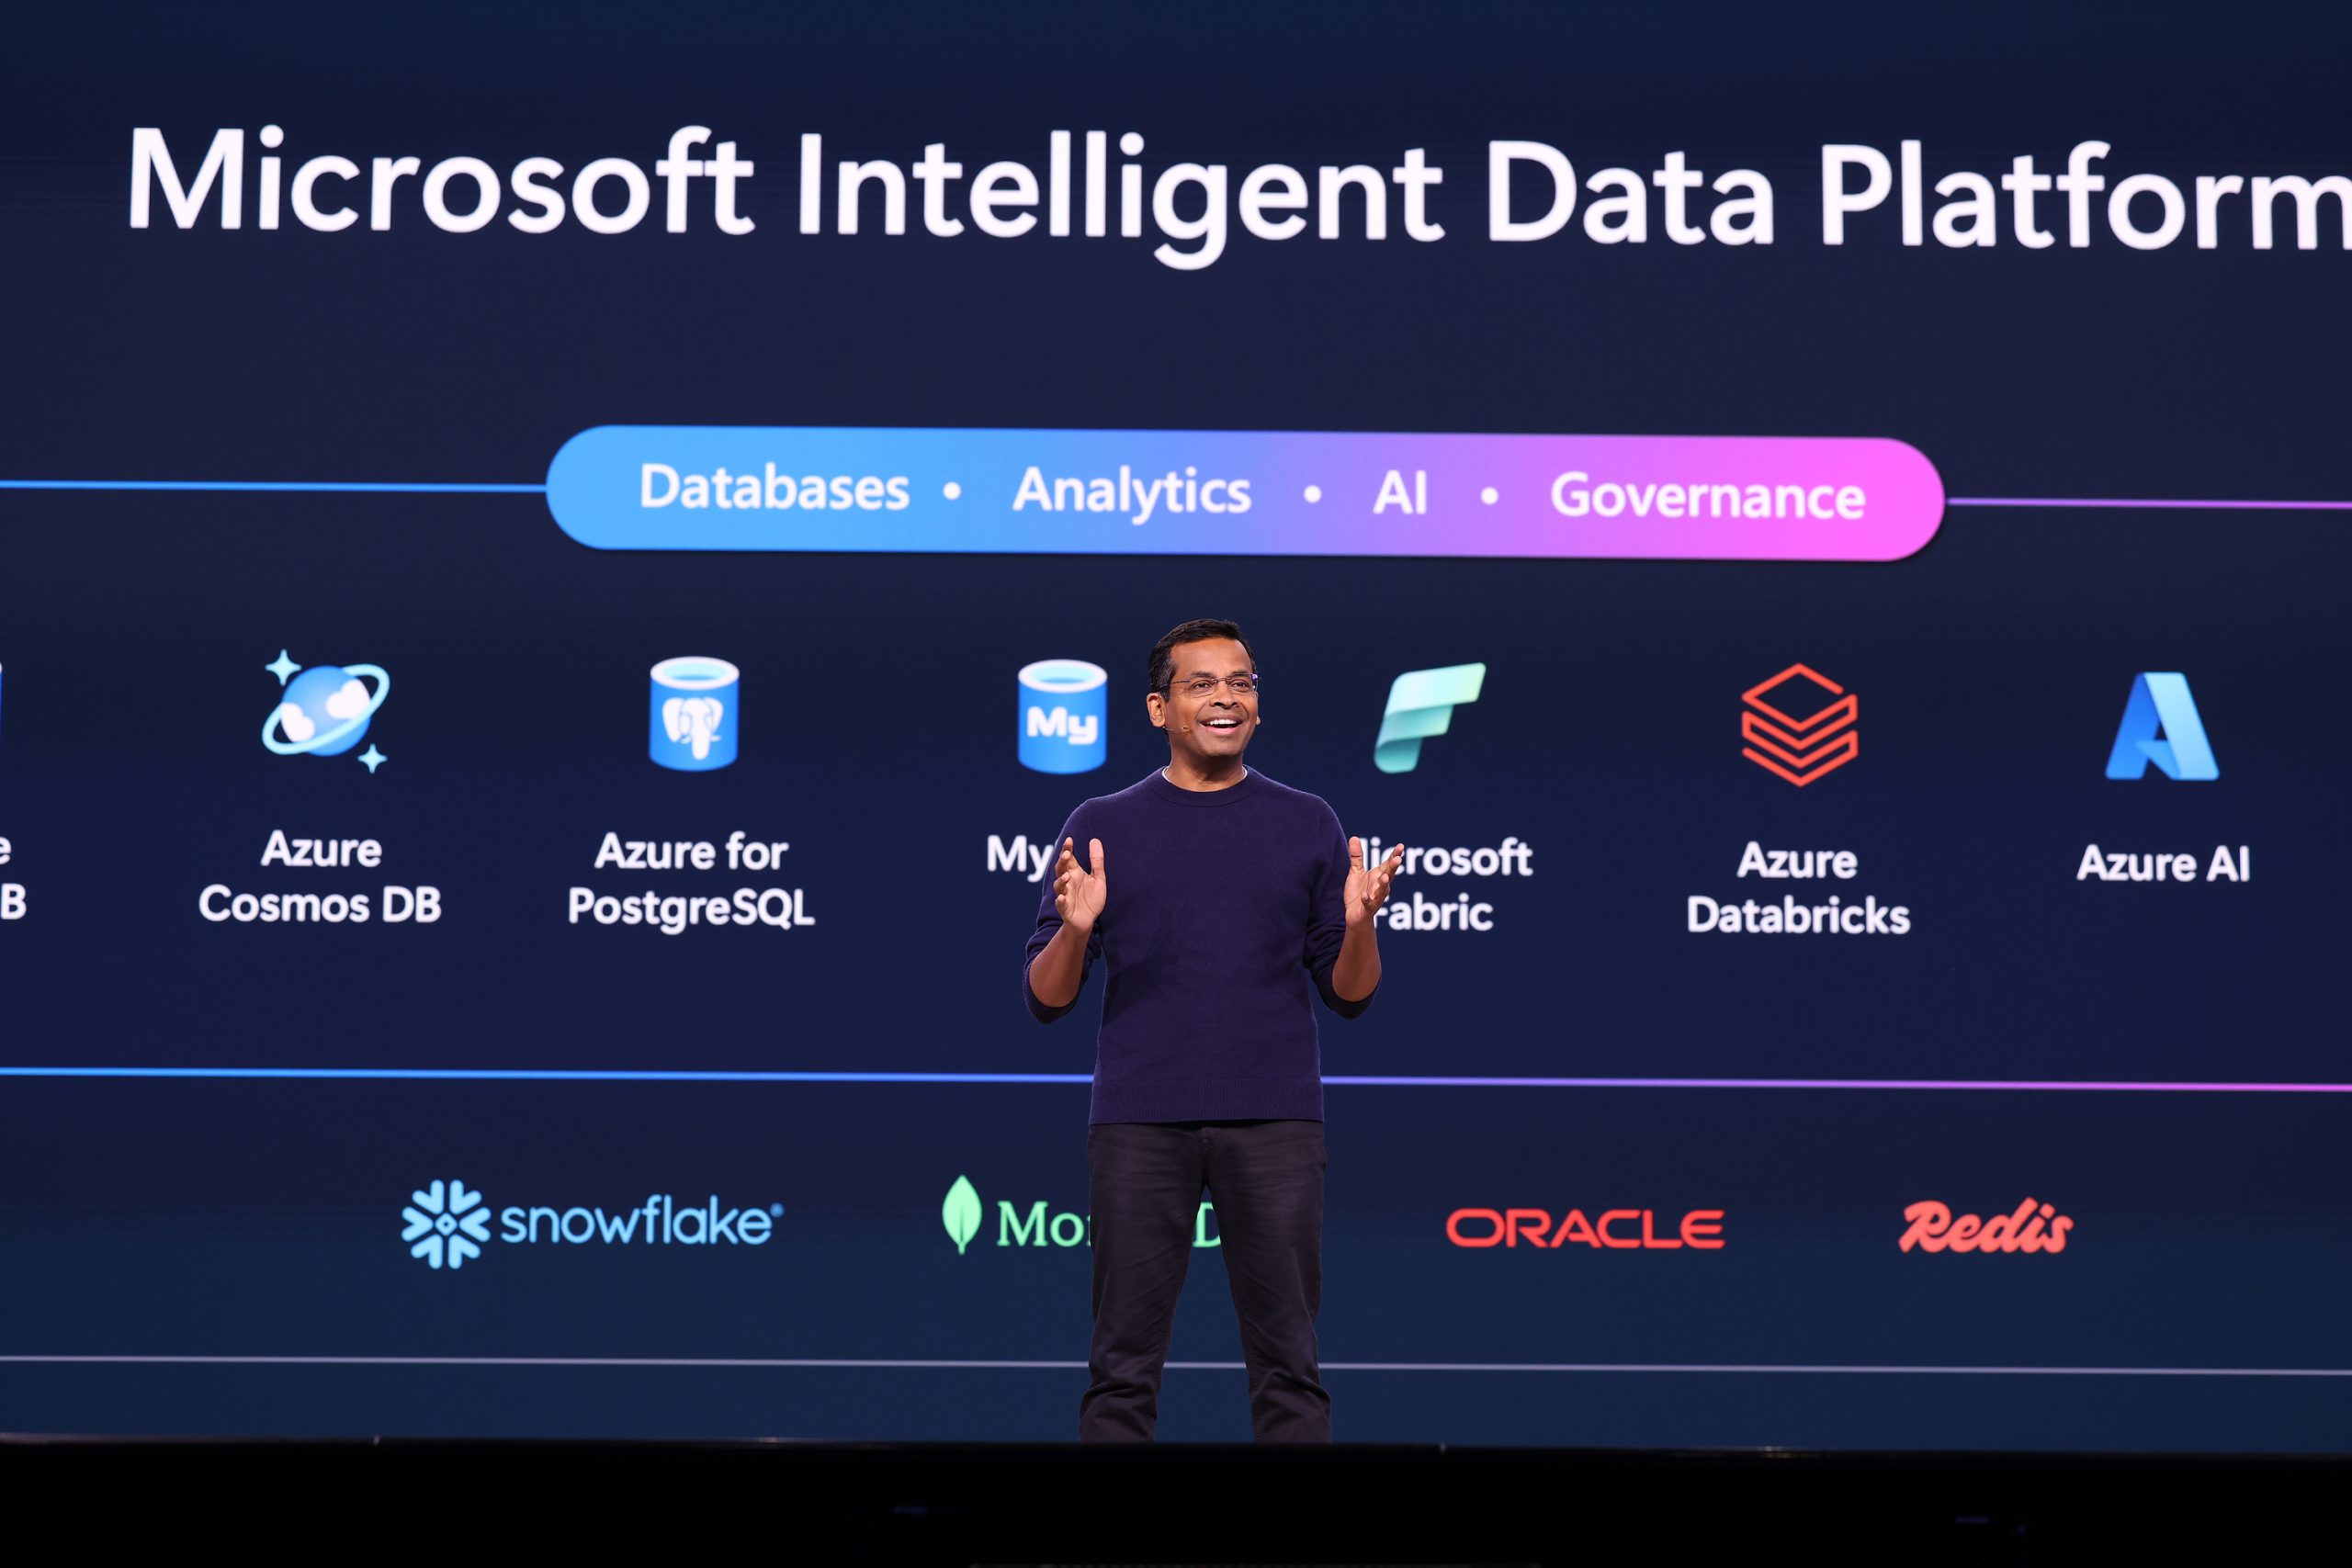 A man standing on stage speaking to an audience and gesturing with his hands, with text on the screen behind him about the Microsoft Intelligent Data Platform